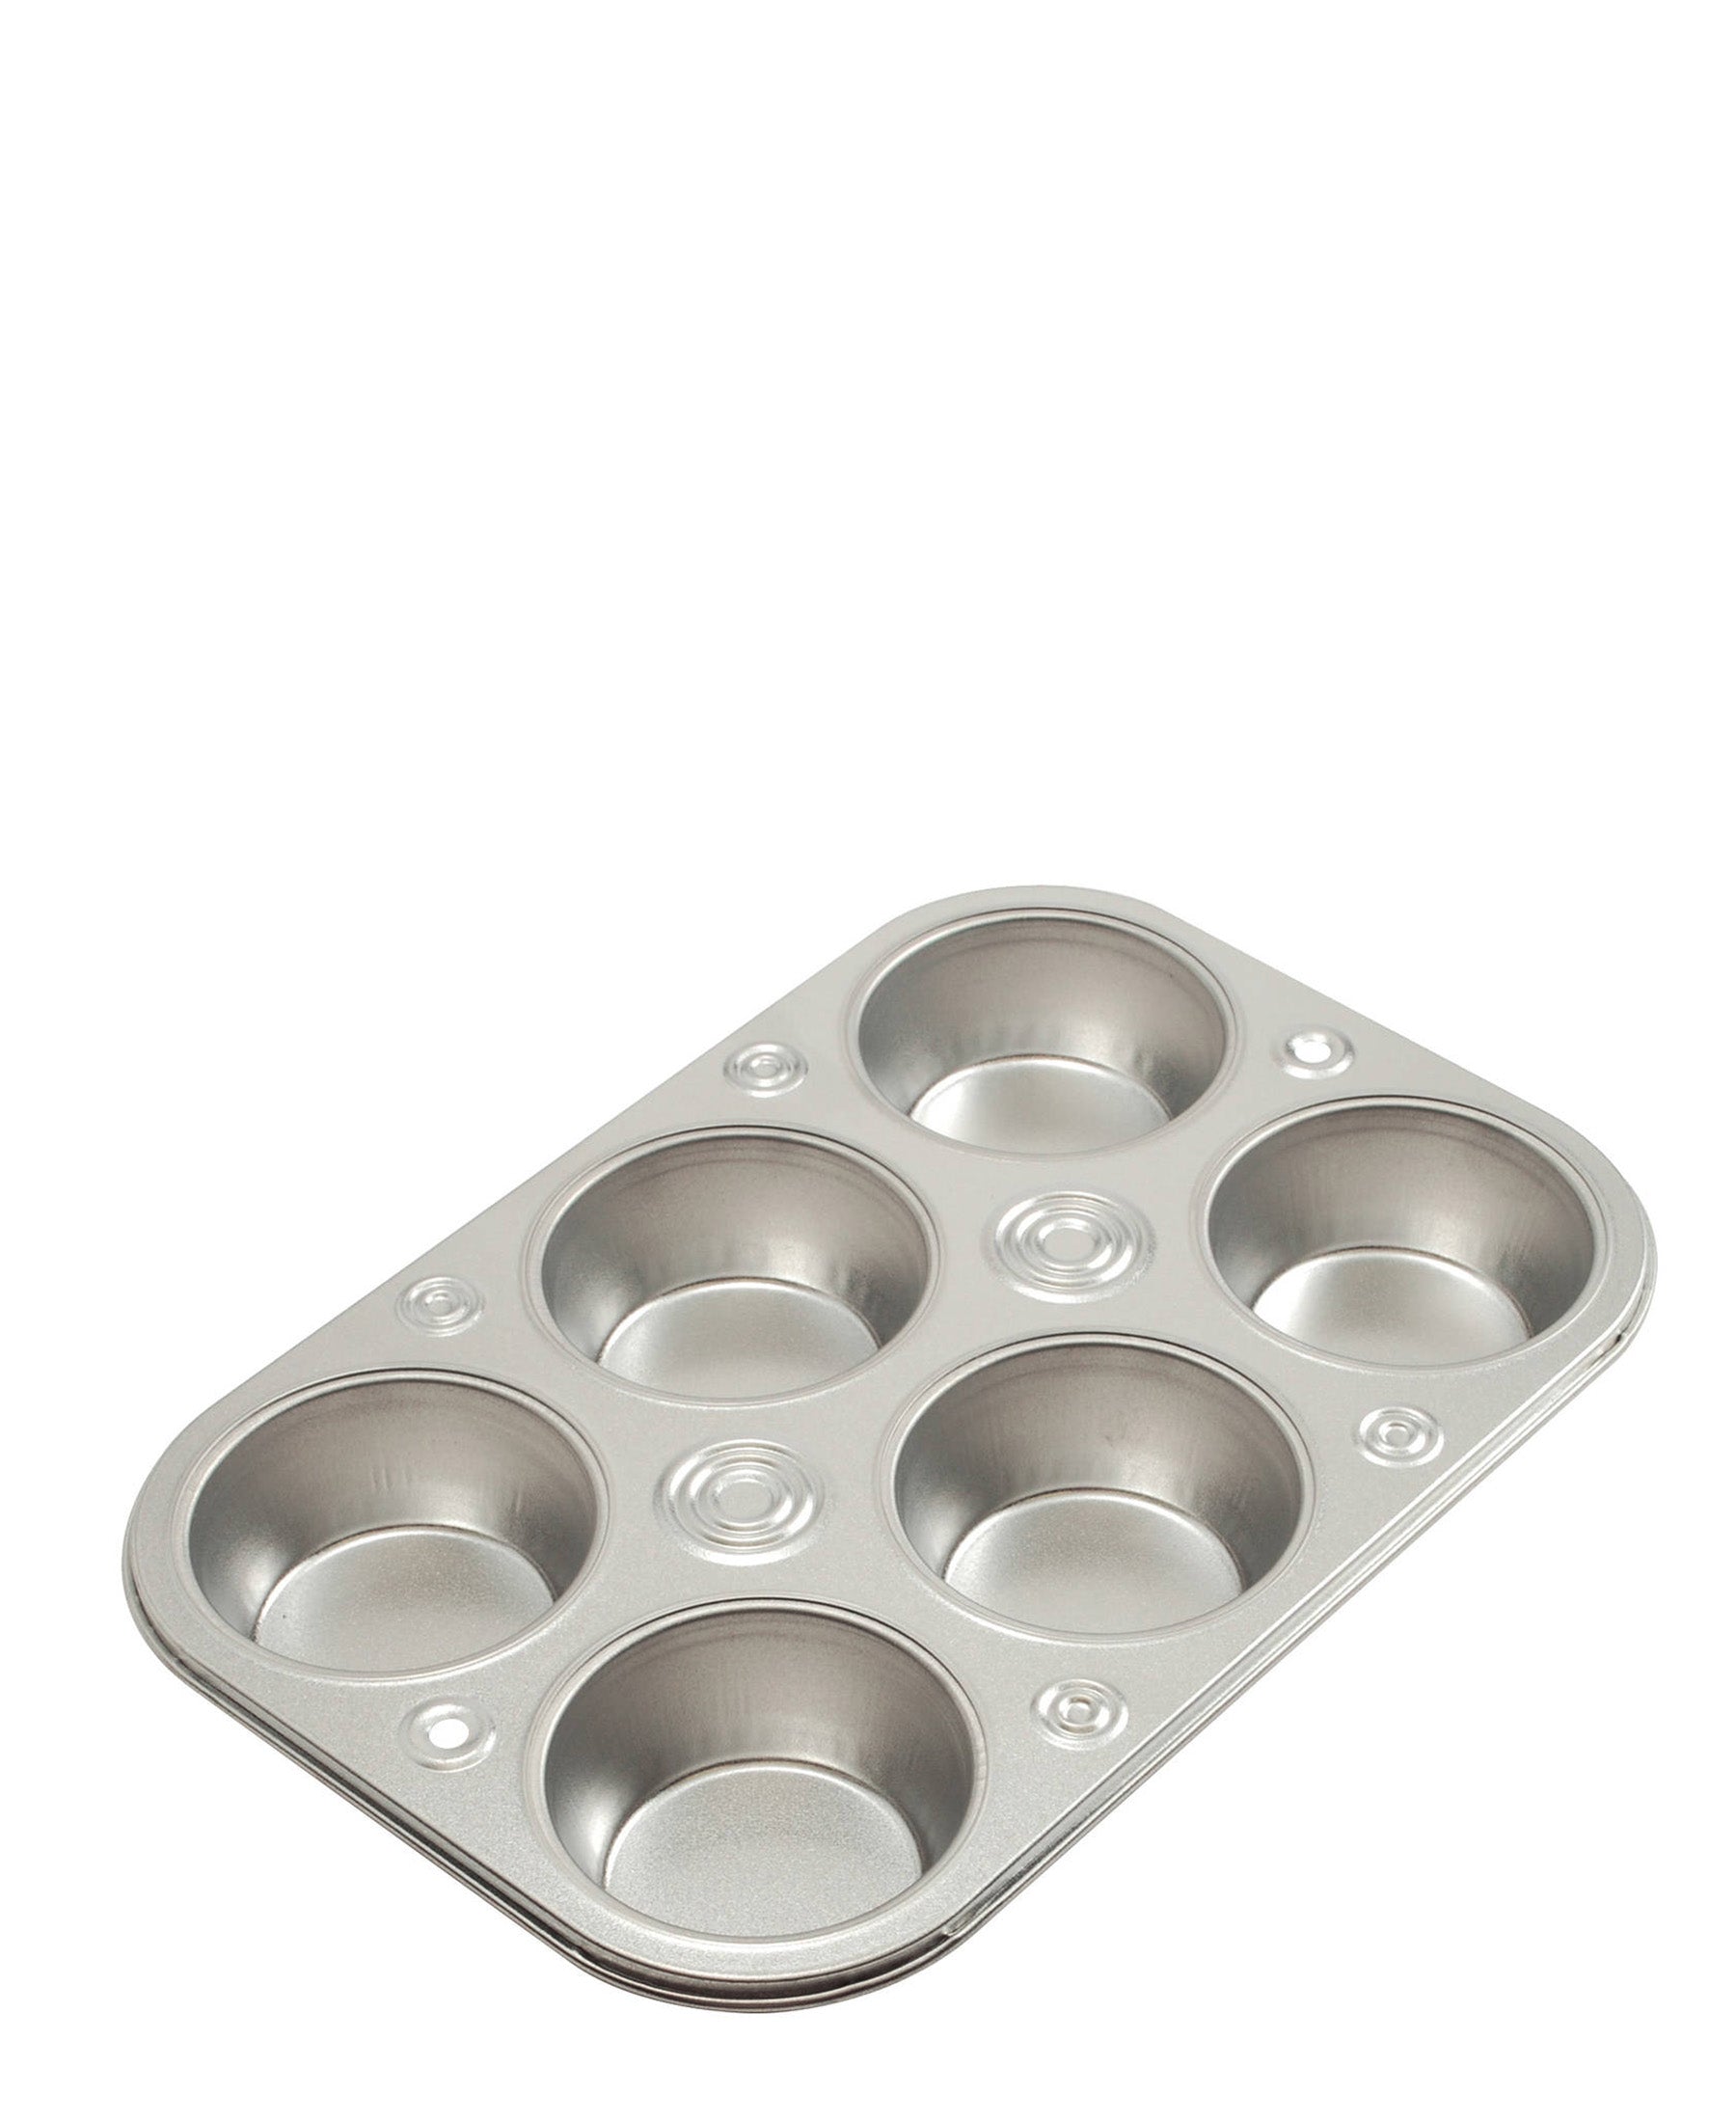 Metalix 6 Cup Muffin Pan - Silver